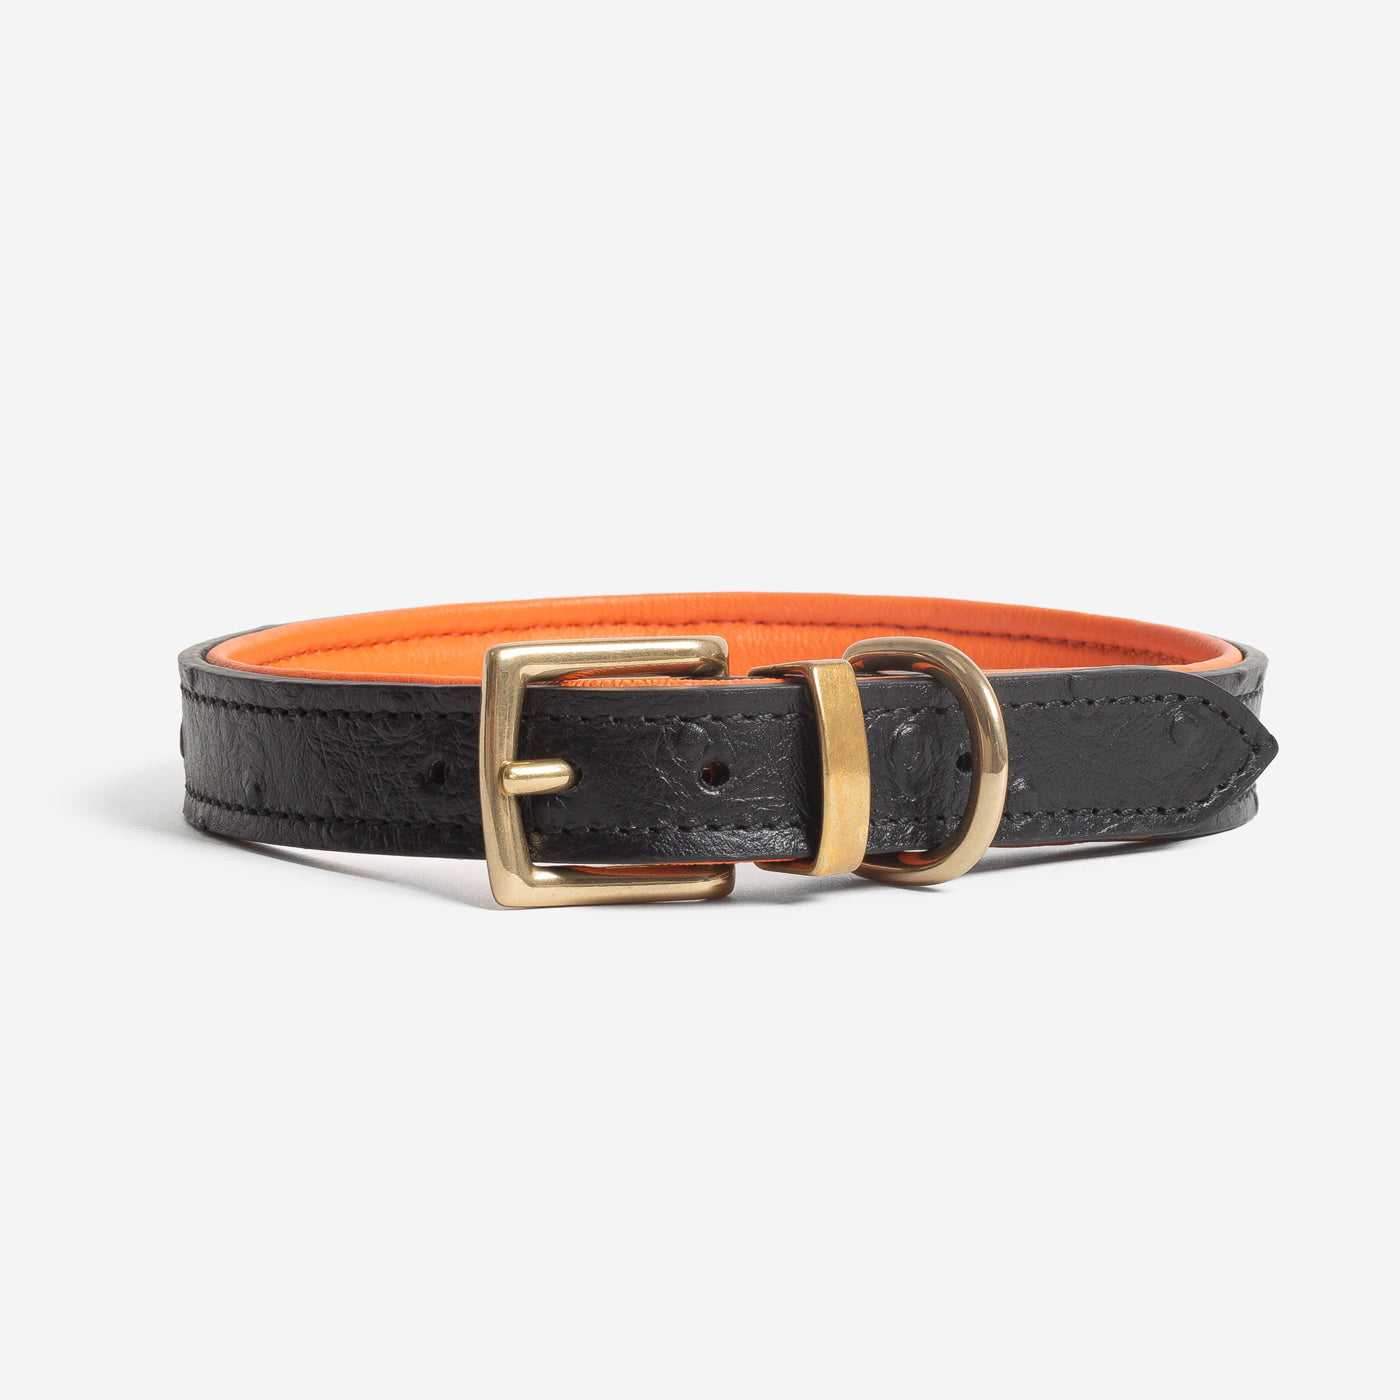 Ostrich Leather Dog Collar in Black & Orange by Lords & Labradors